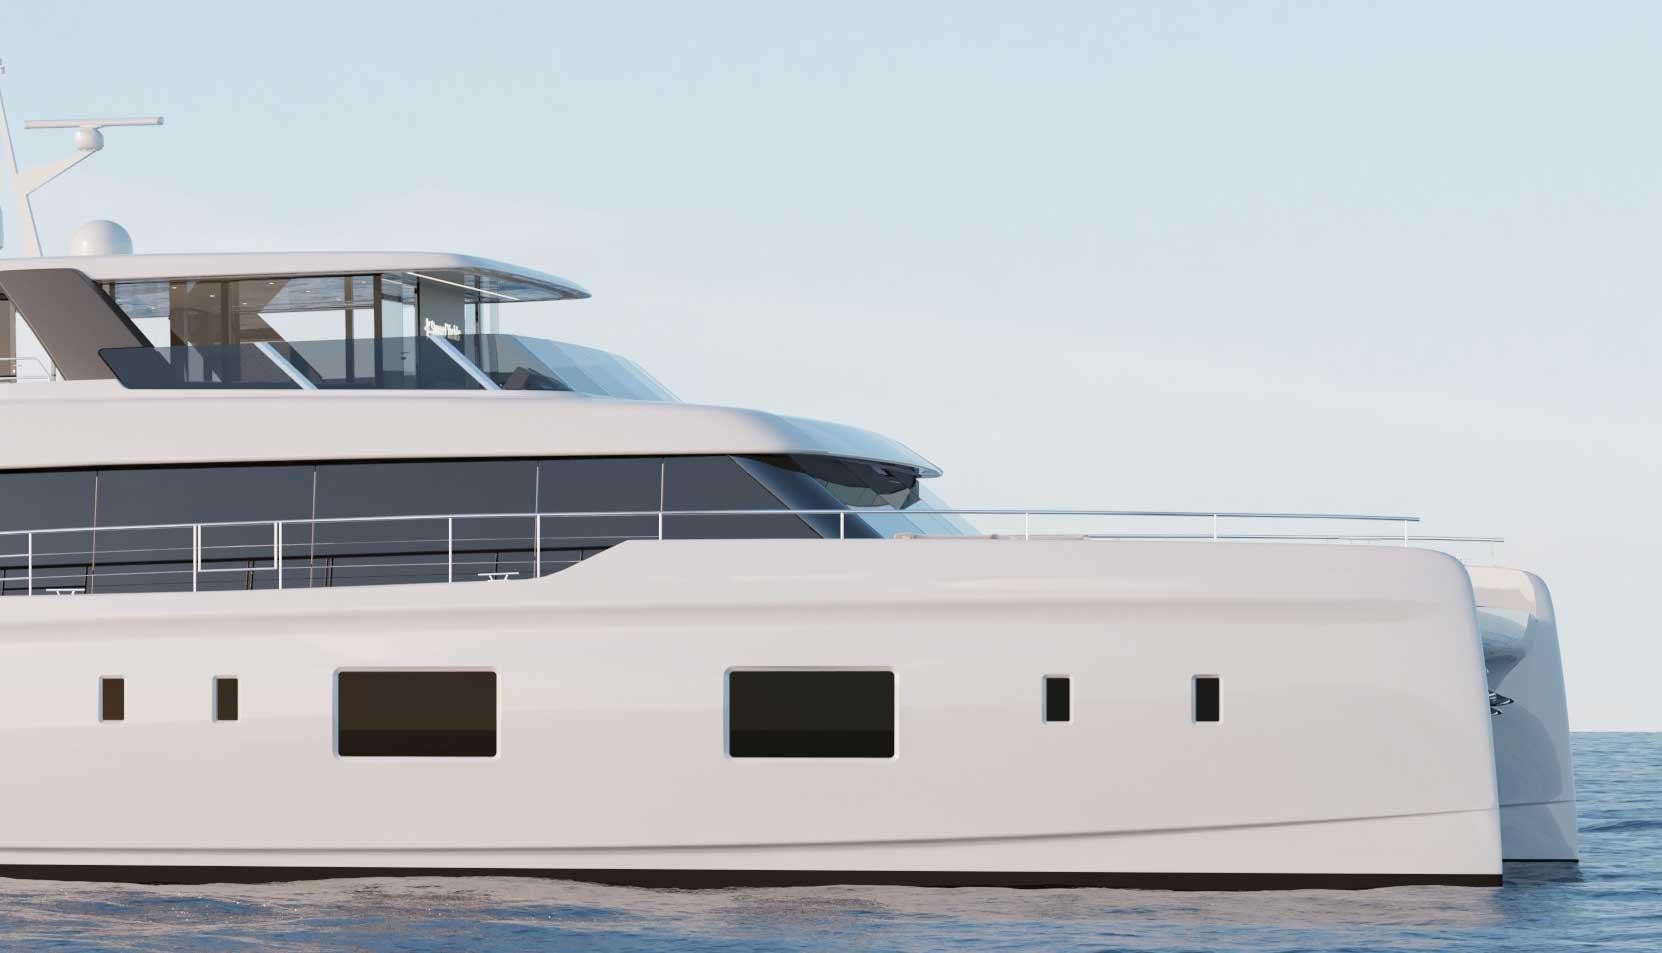 Super Catamarans On The Rise: Another 100 Sunreef Power Commissioned